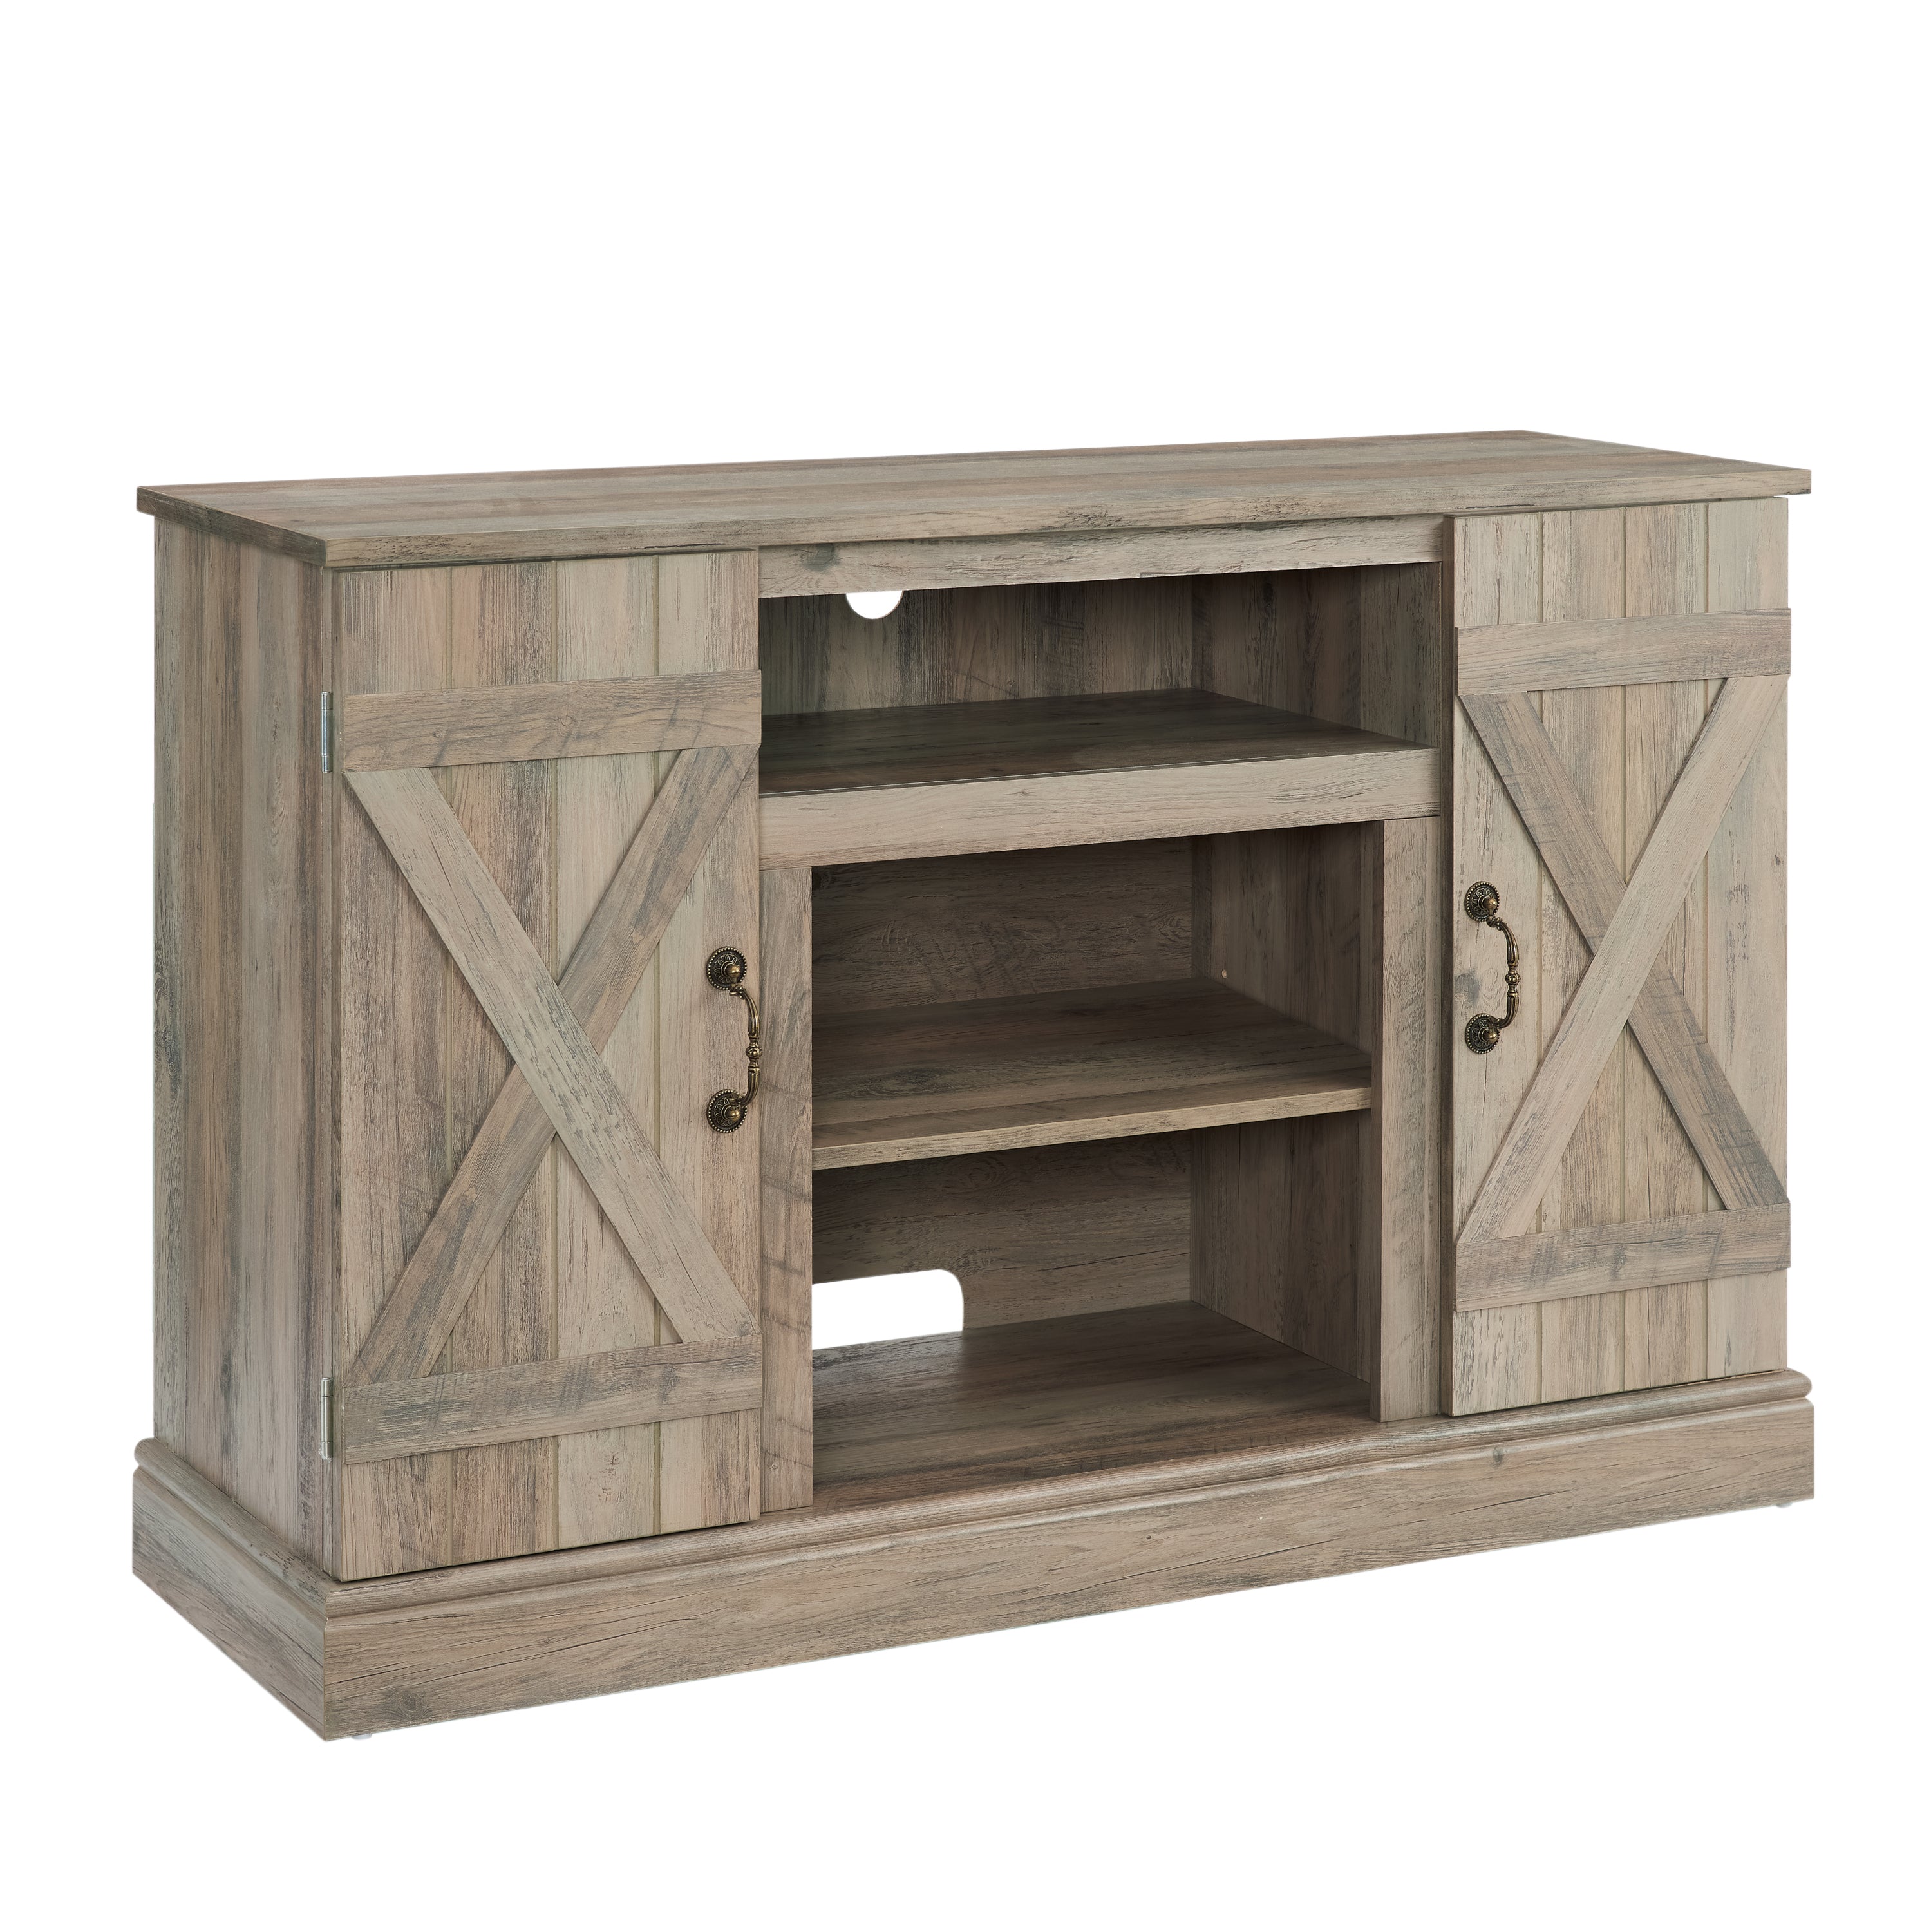 Farmhouse Classic TV Stand Antique Entertainment Console for TV up to 50" with Open and Closed Storage Space, Gray Wash